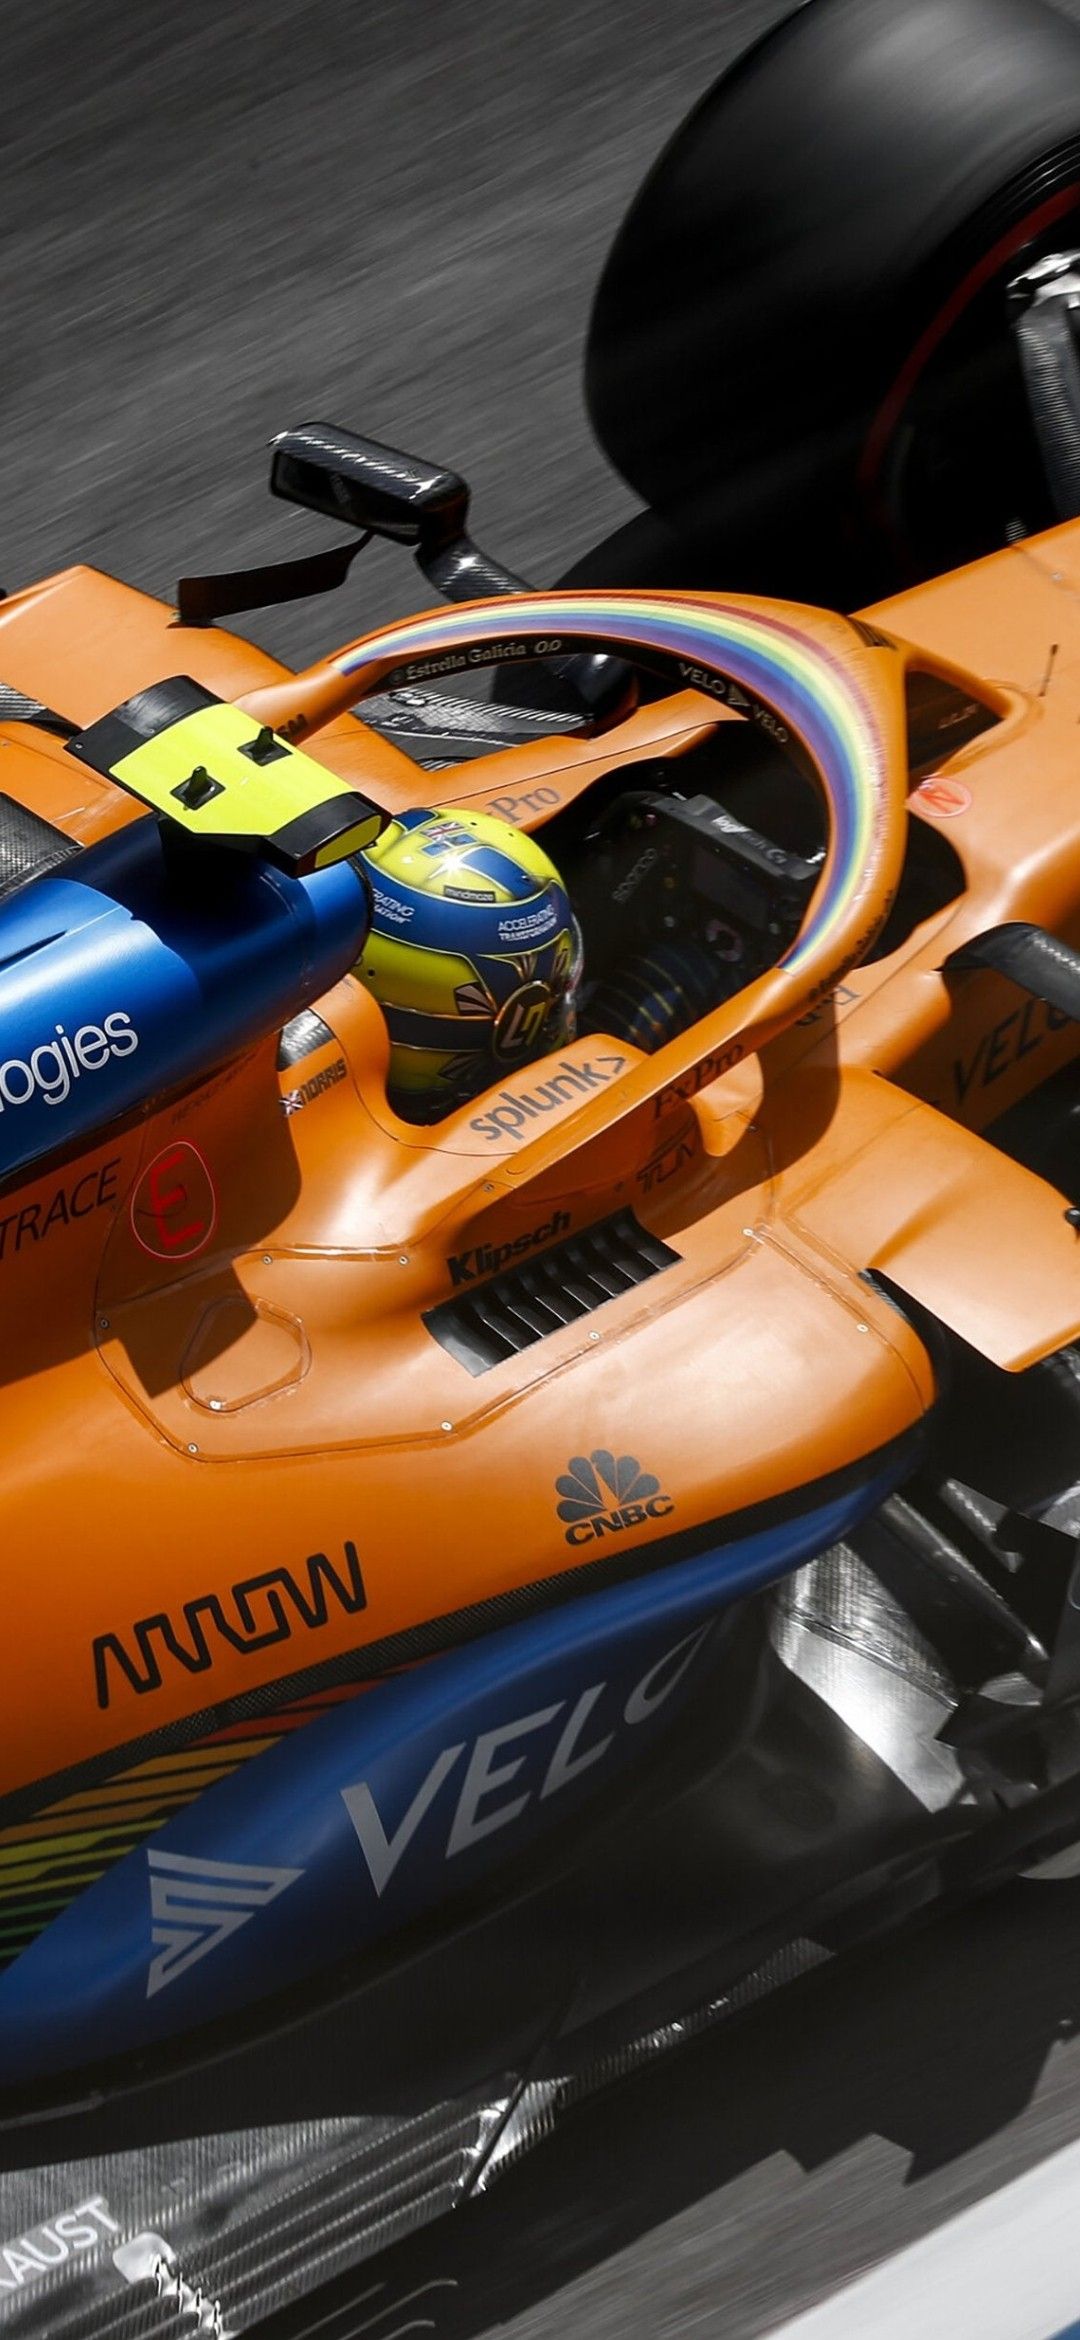 Mclaren Mcl35 iPhone And Android Wallpaper